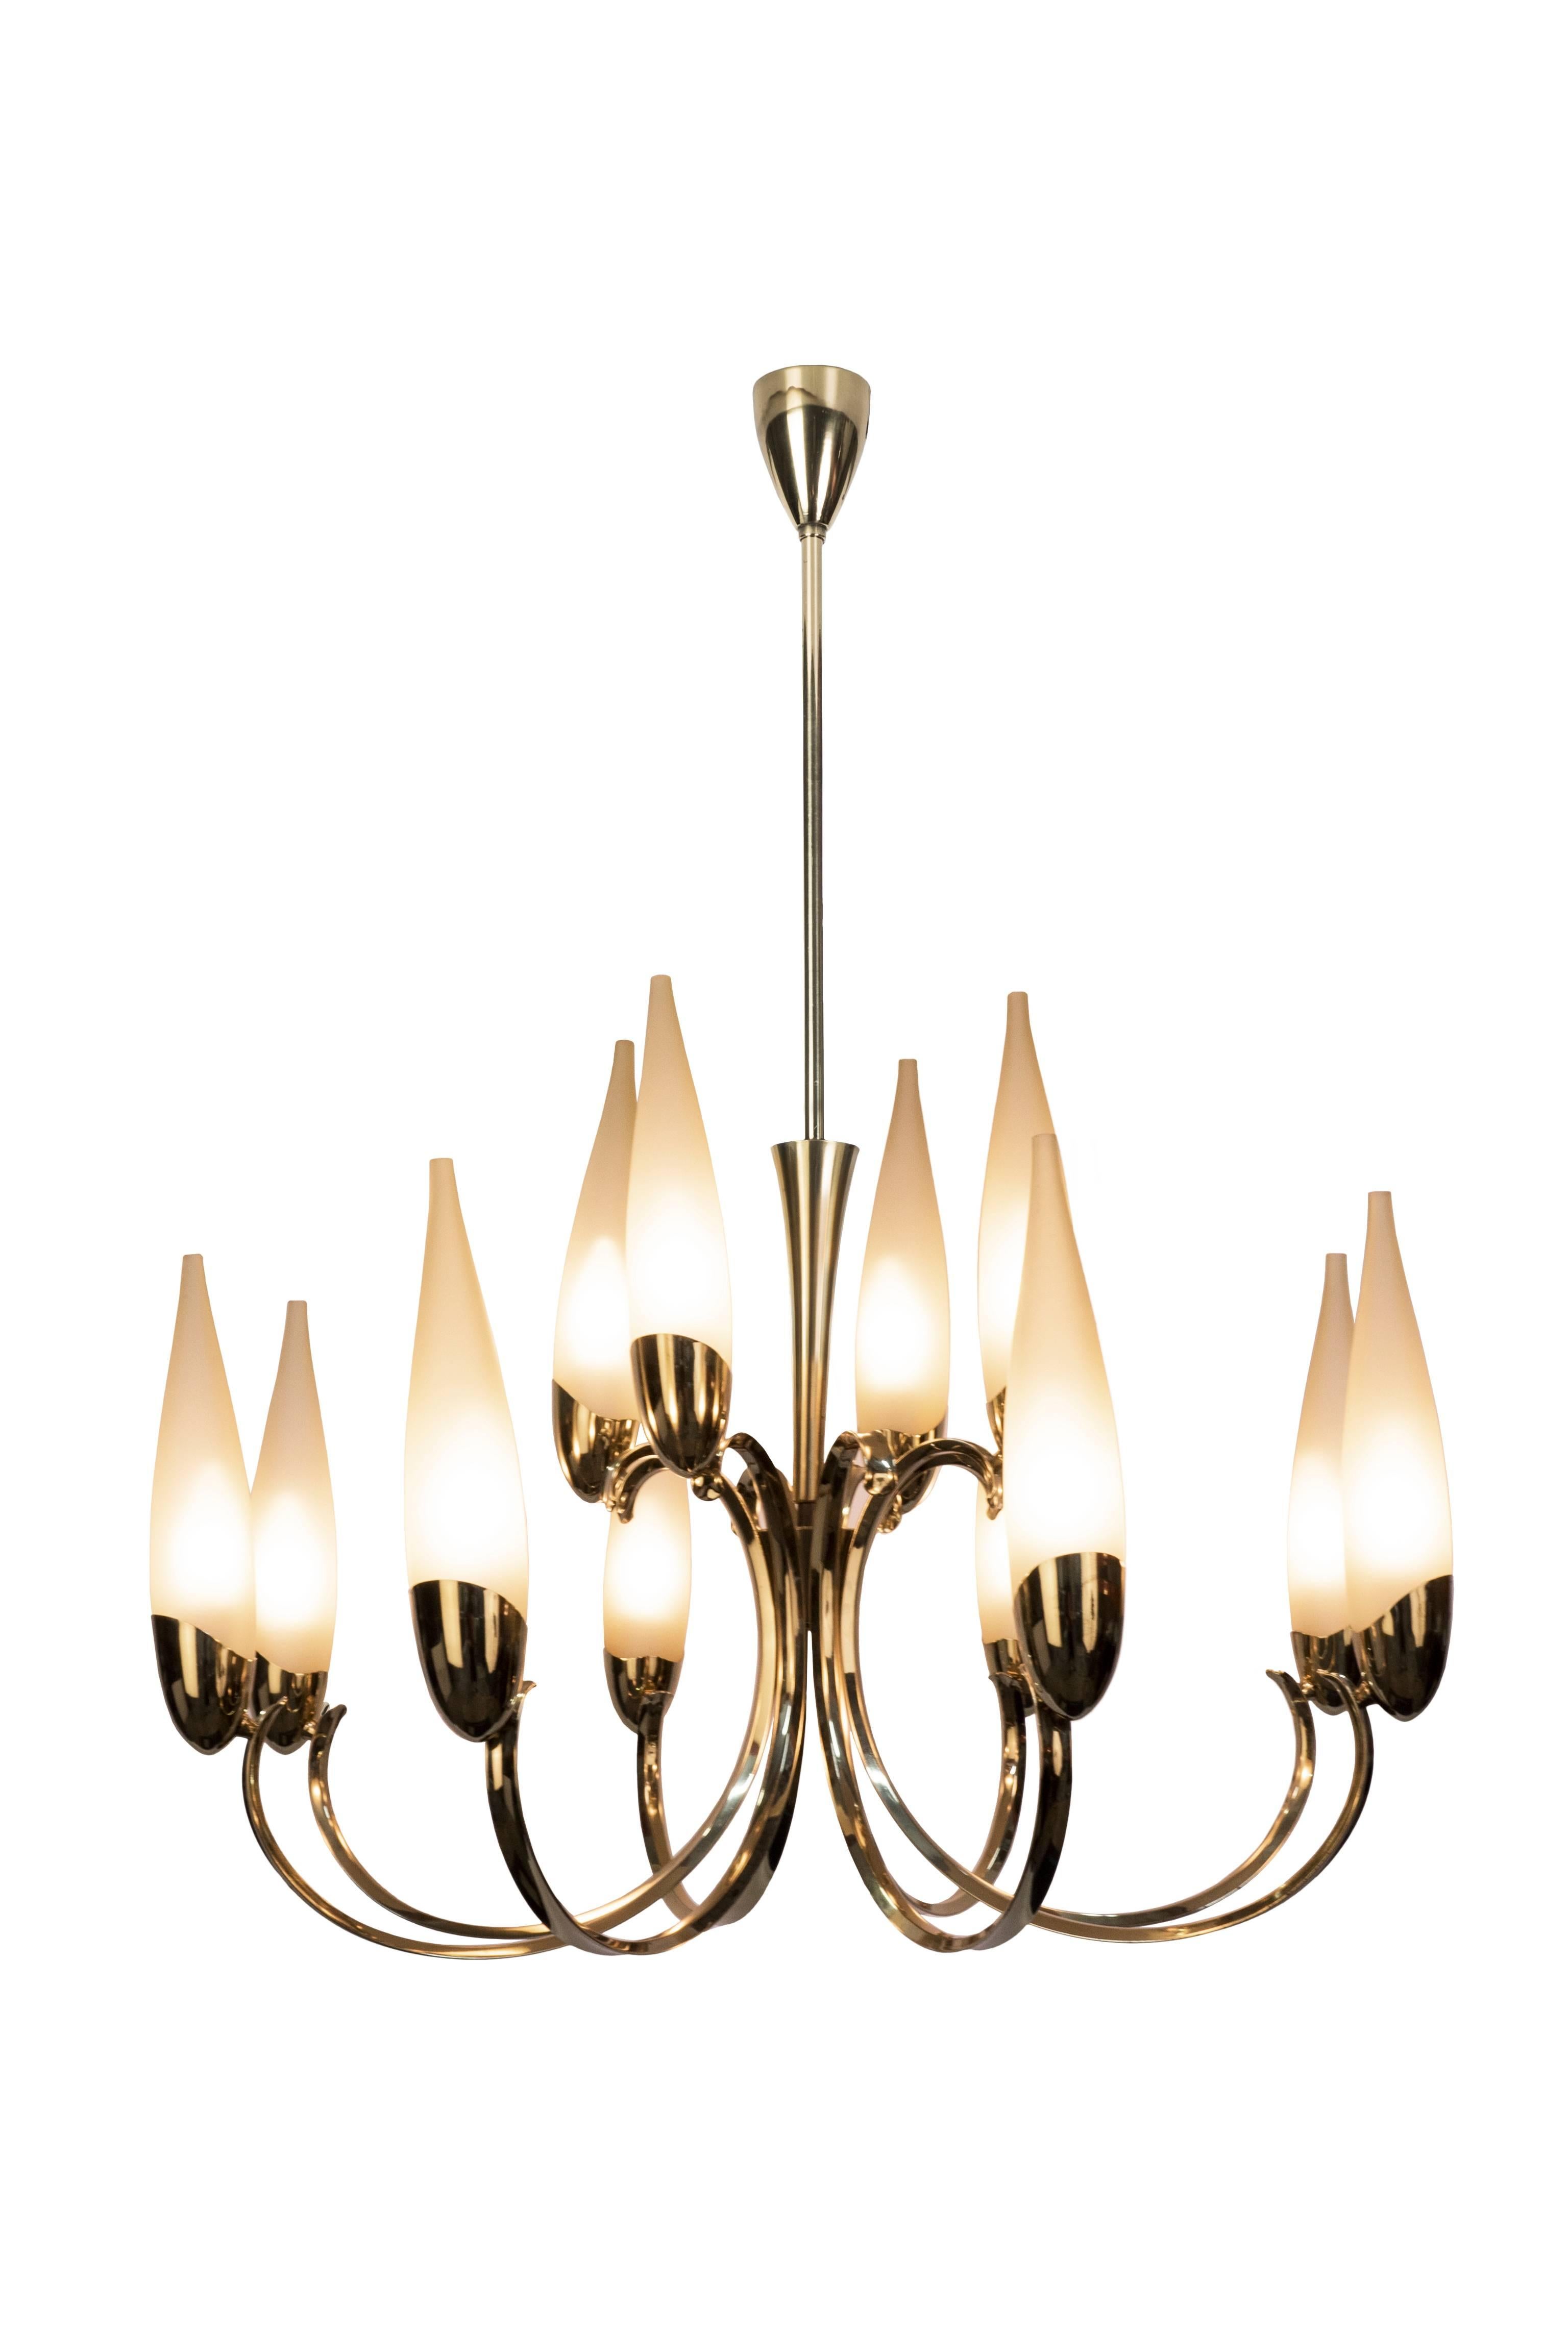 This wonderful 1950s Italian chandeliers in the manner of Stilnovo features a candelabra inspired design with a brass frame and (12) filigree handblown conical form lampshades.

Made in Italy, circa 1950

two available.